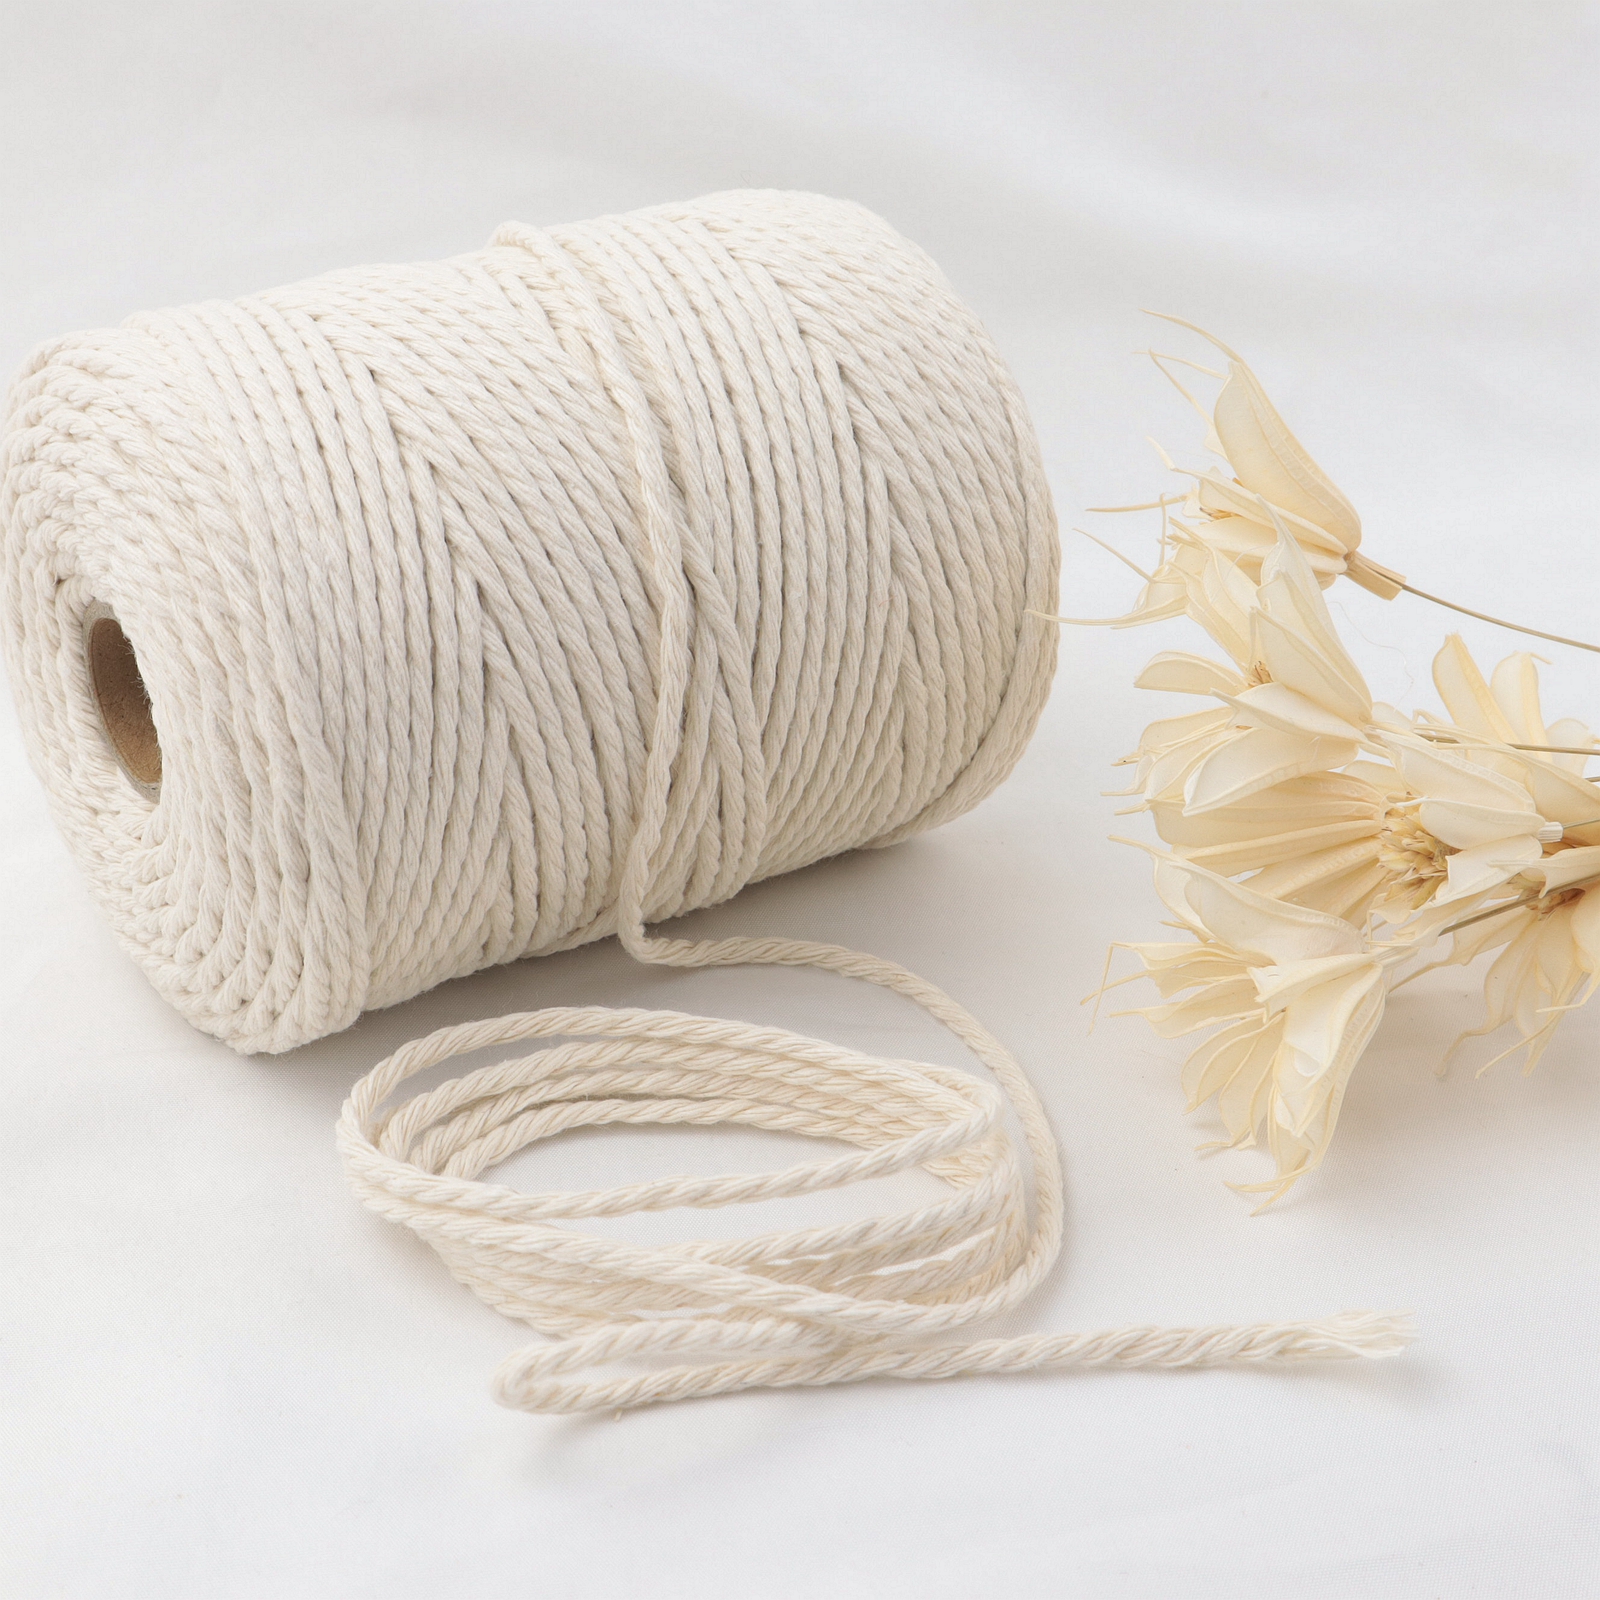 White Twine 100 Yards 0.3cm Wide Twine Perfect For Crafts, Gift Wrapping,  Kitchen, Butchers